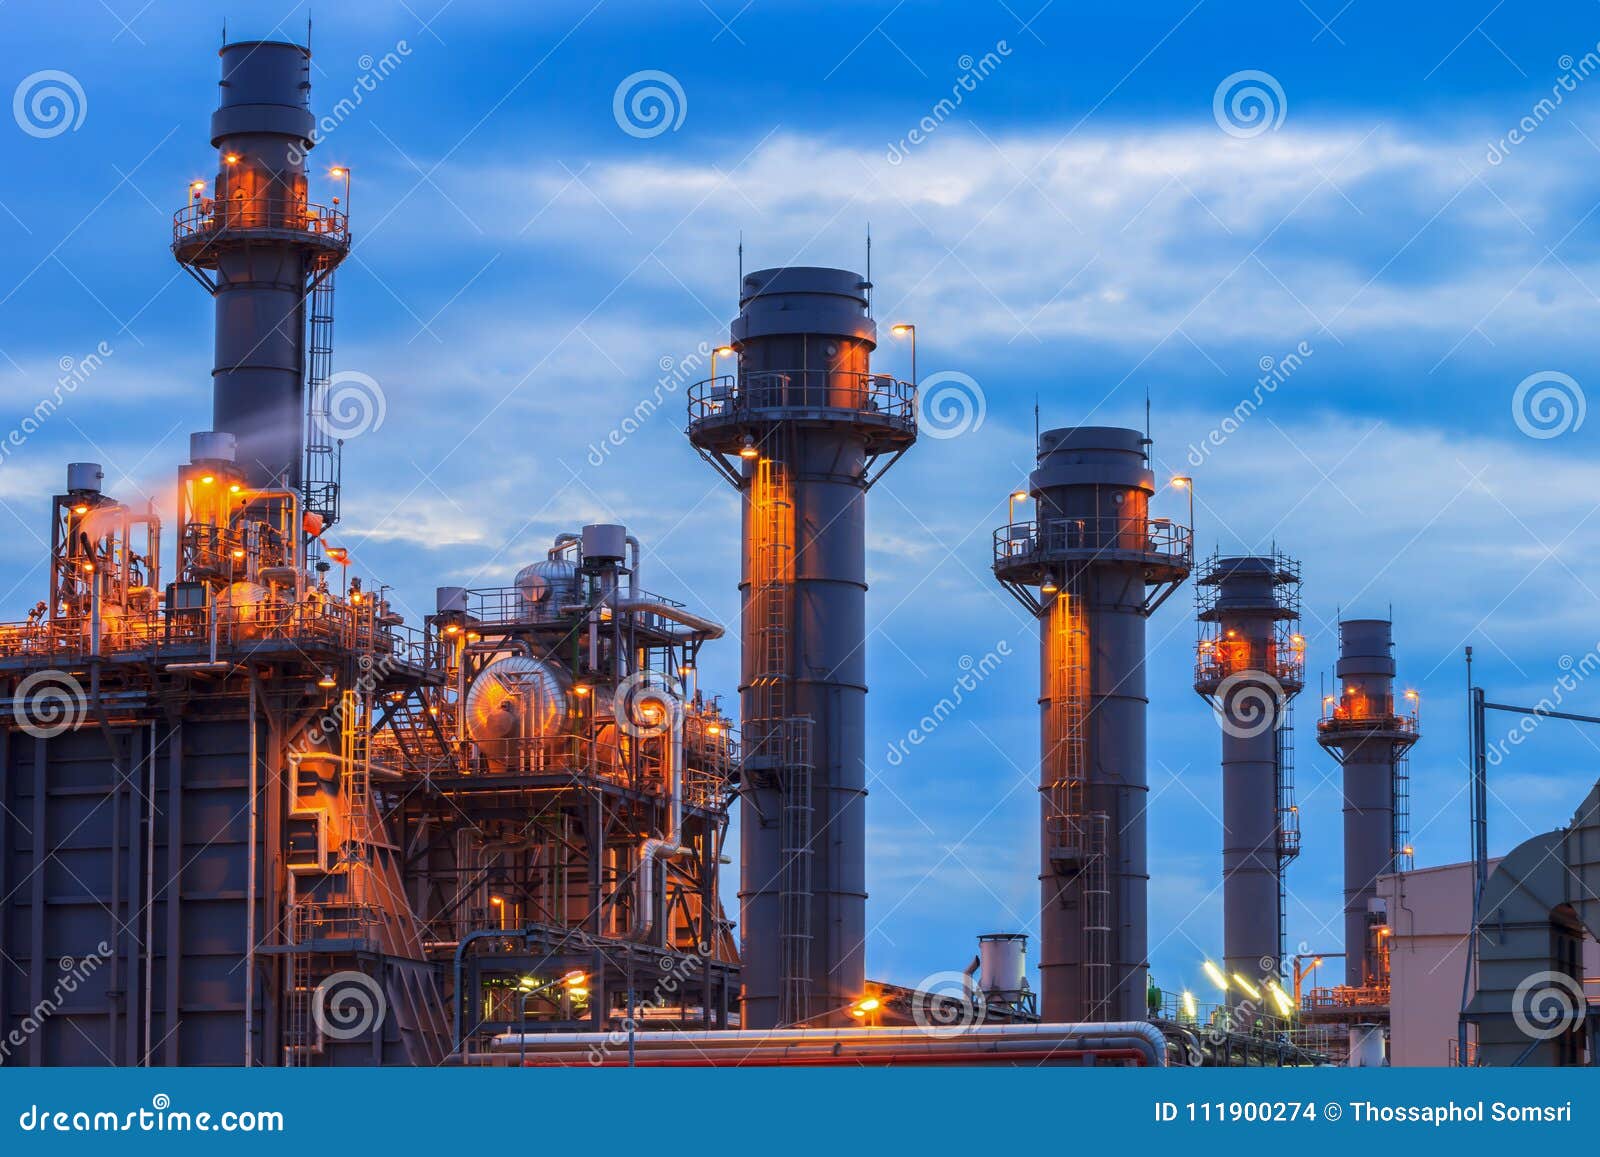 natural gas combined cycle power plant electricity generating station